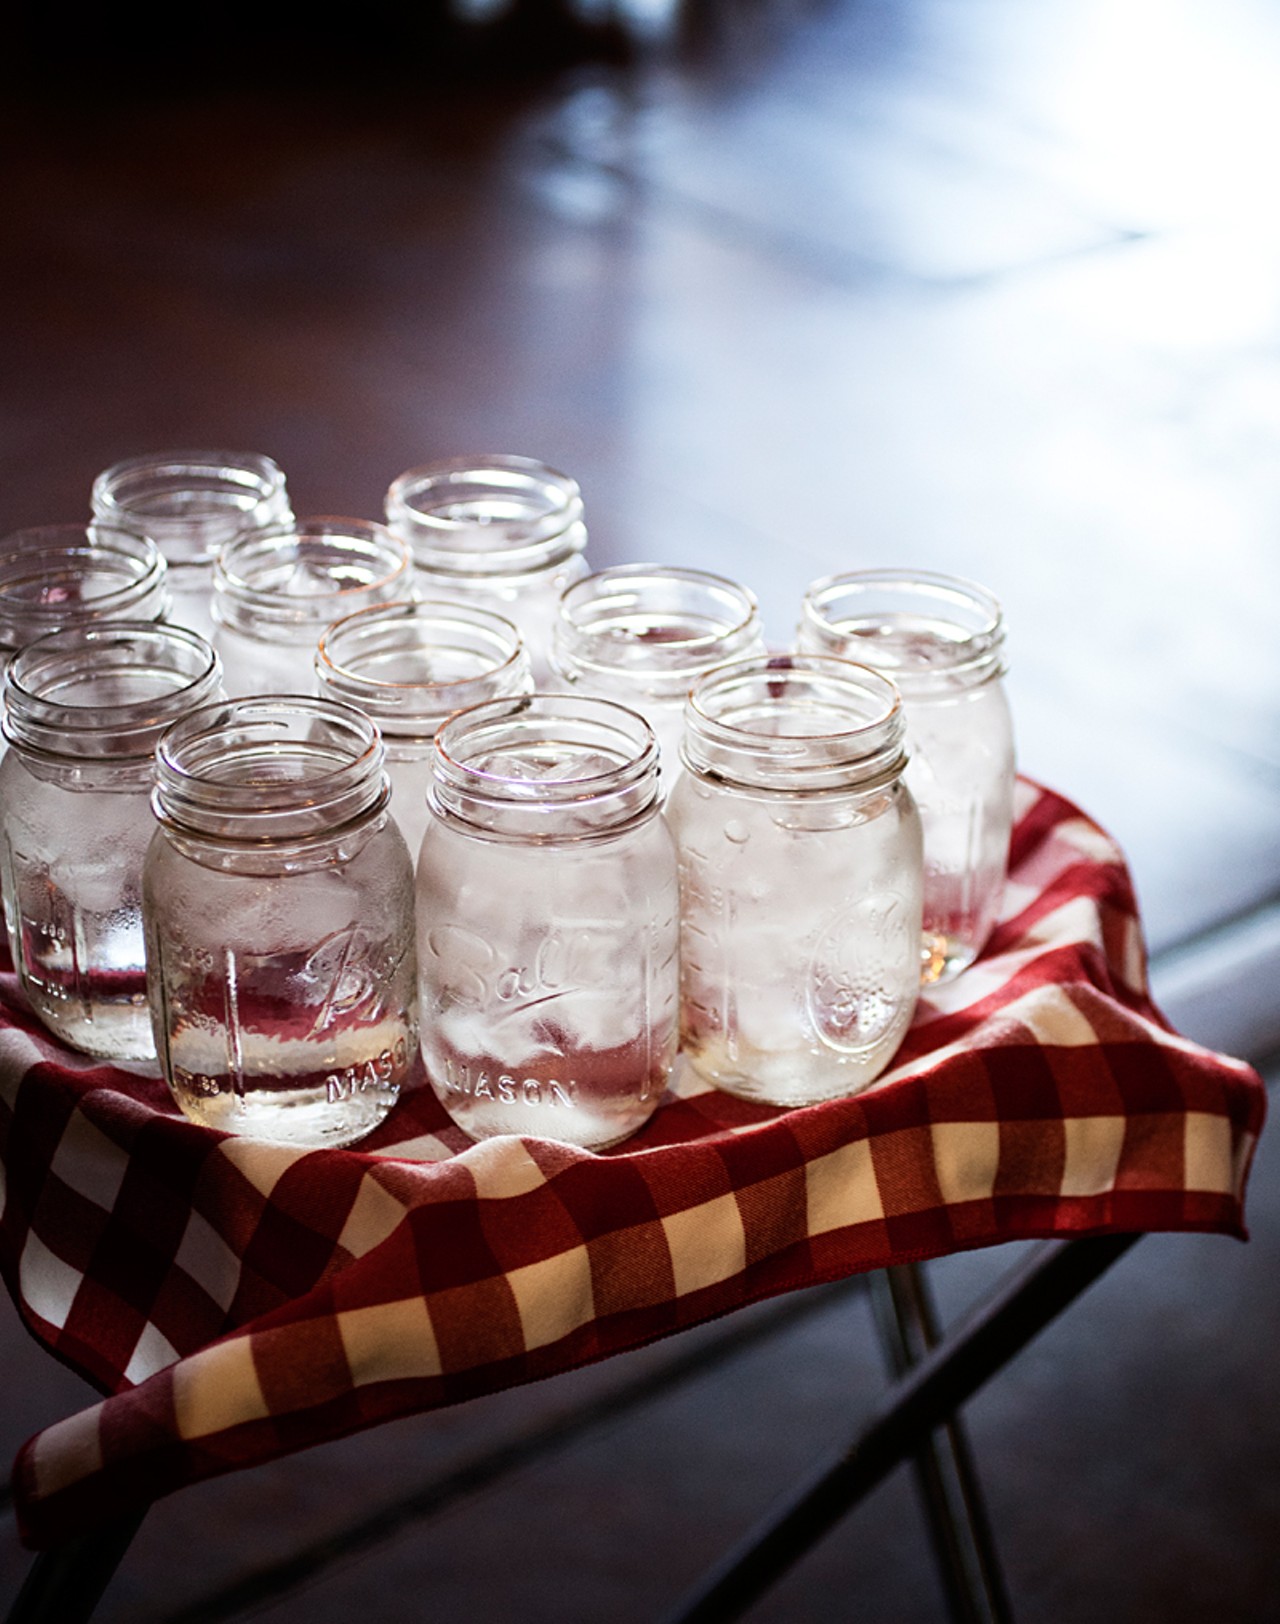 Mason jar water glasses ready to go to restaurant patrons.